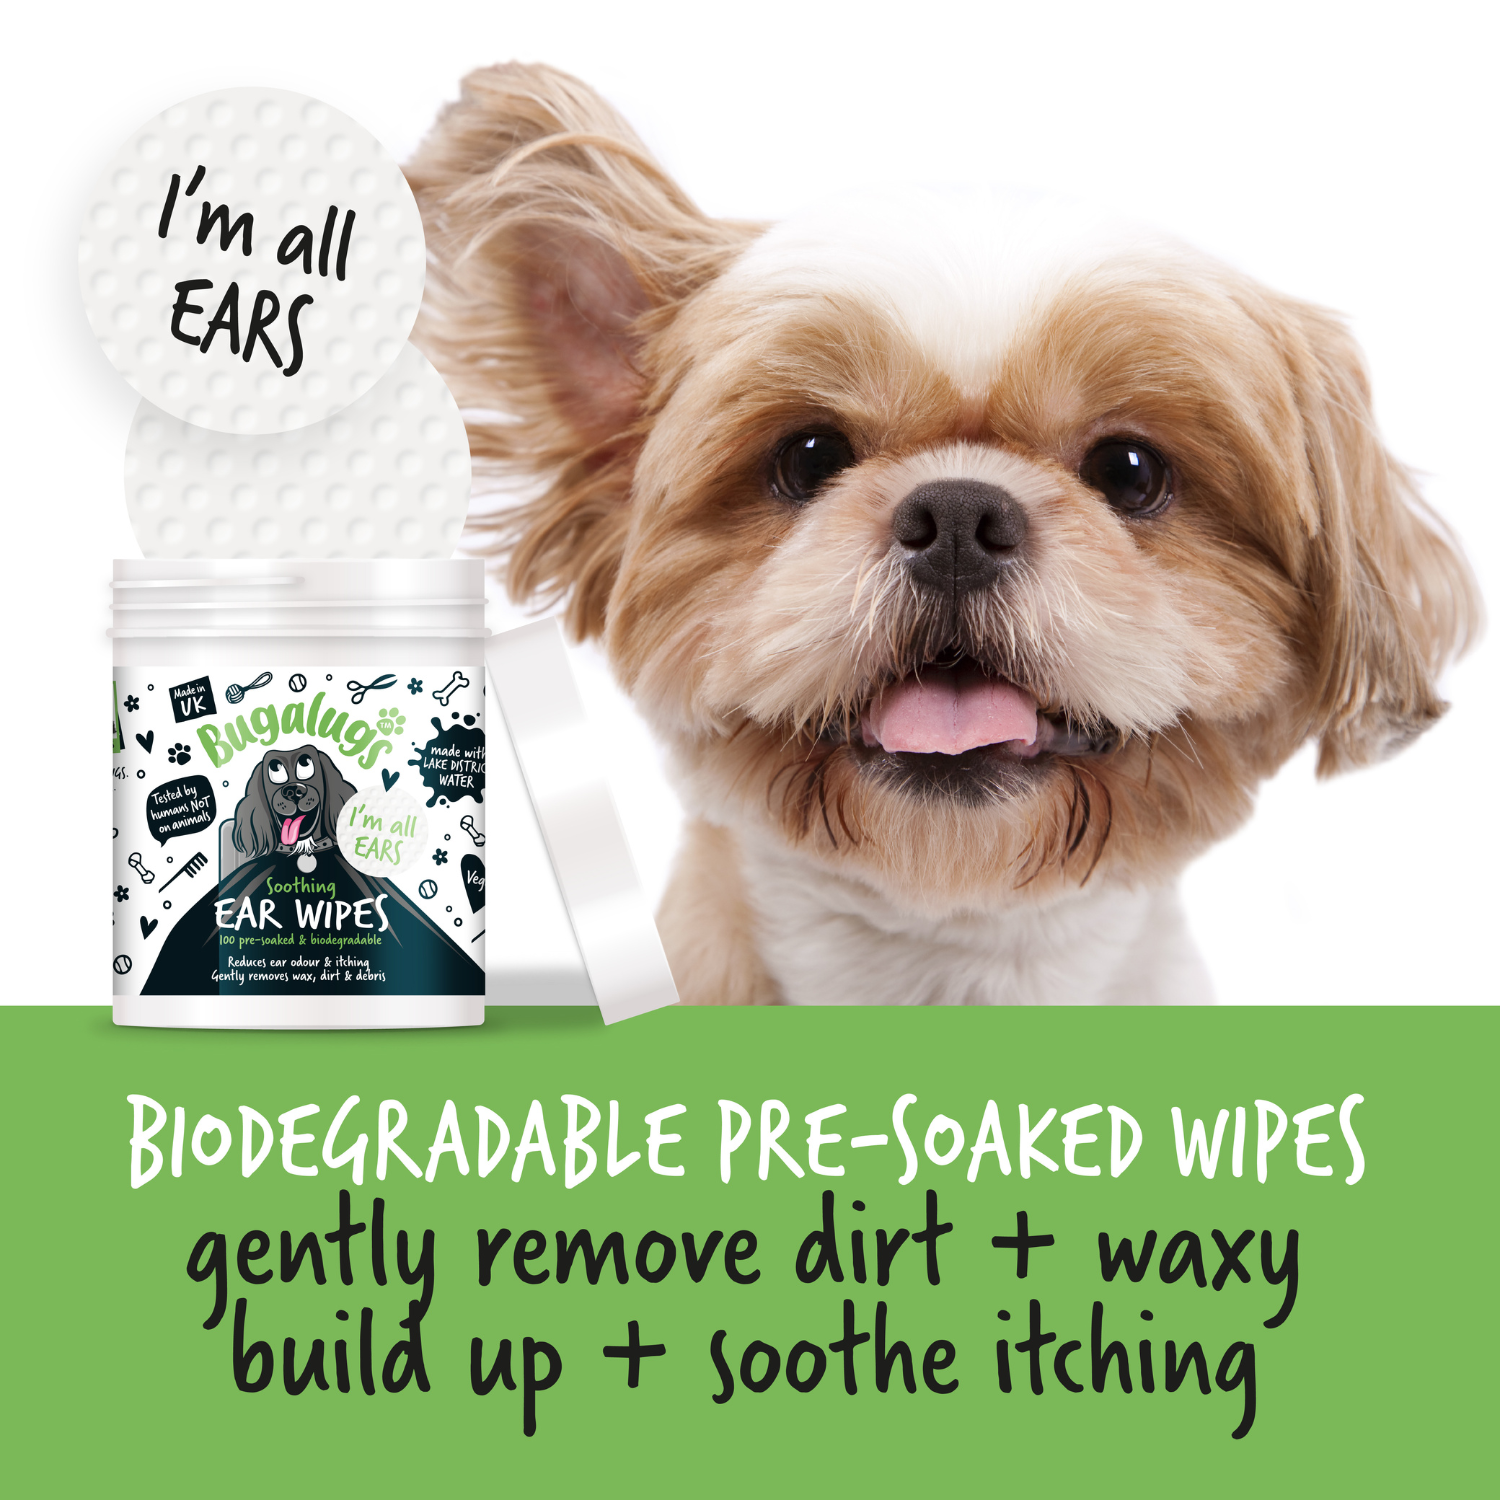 Bugalugs Soothing Ear Wipes - Gently remove dirt and waxy build-up and soothe itching